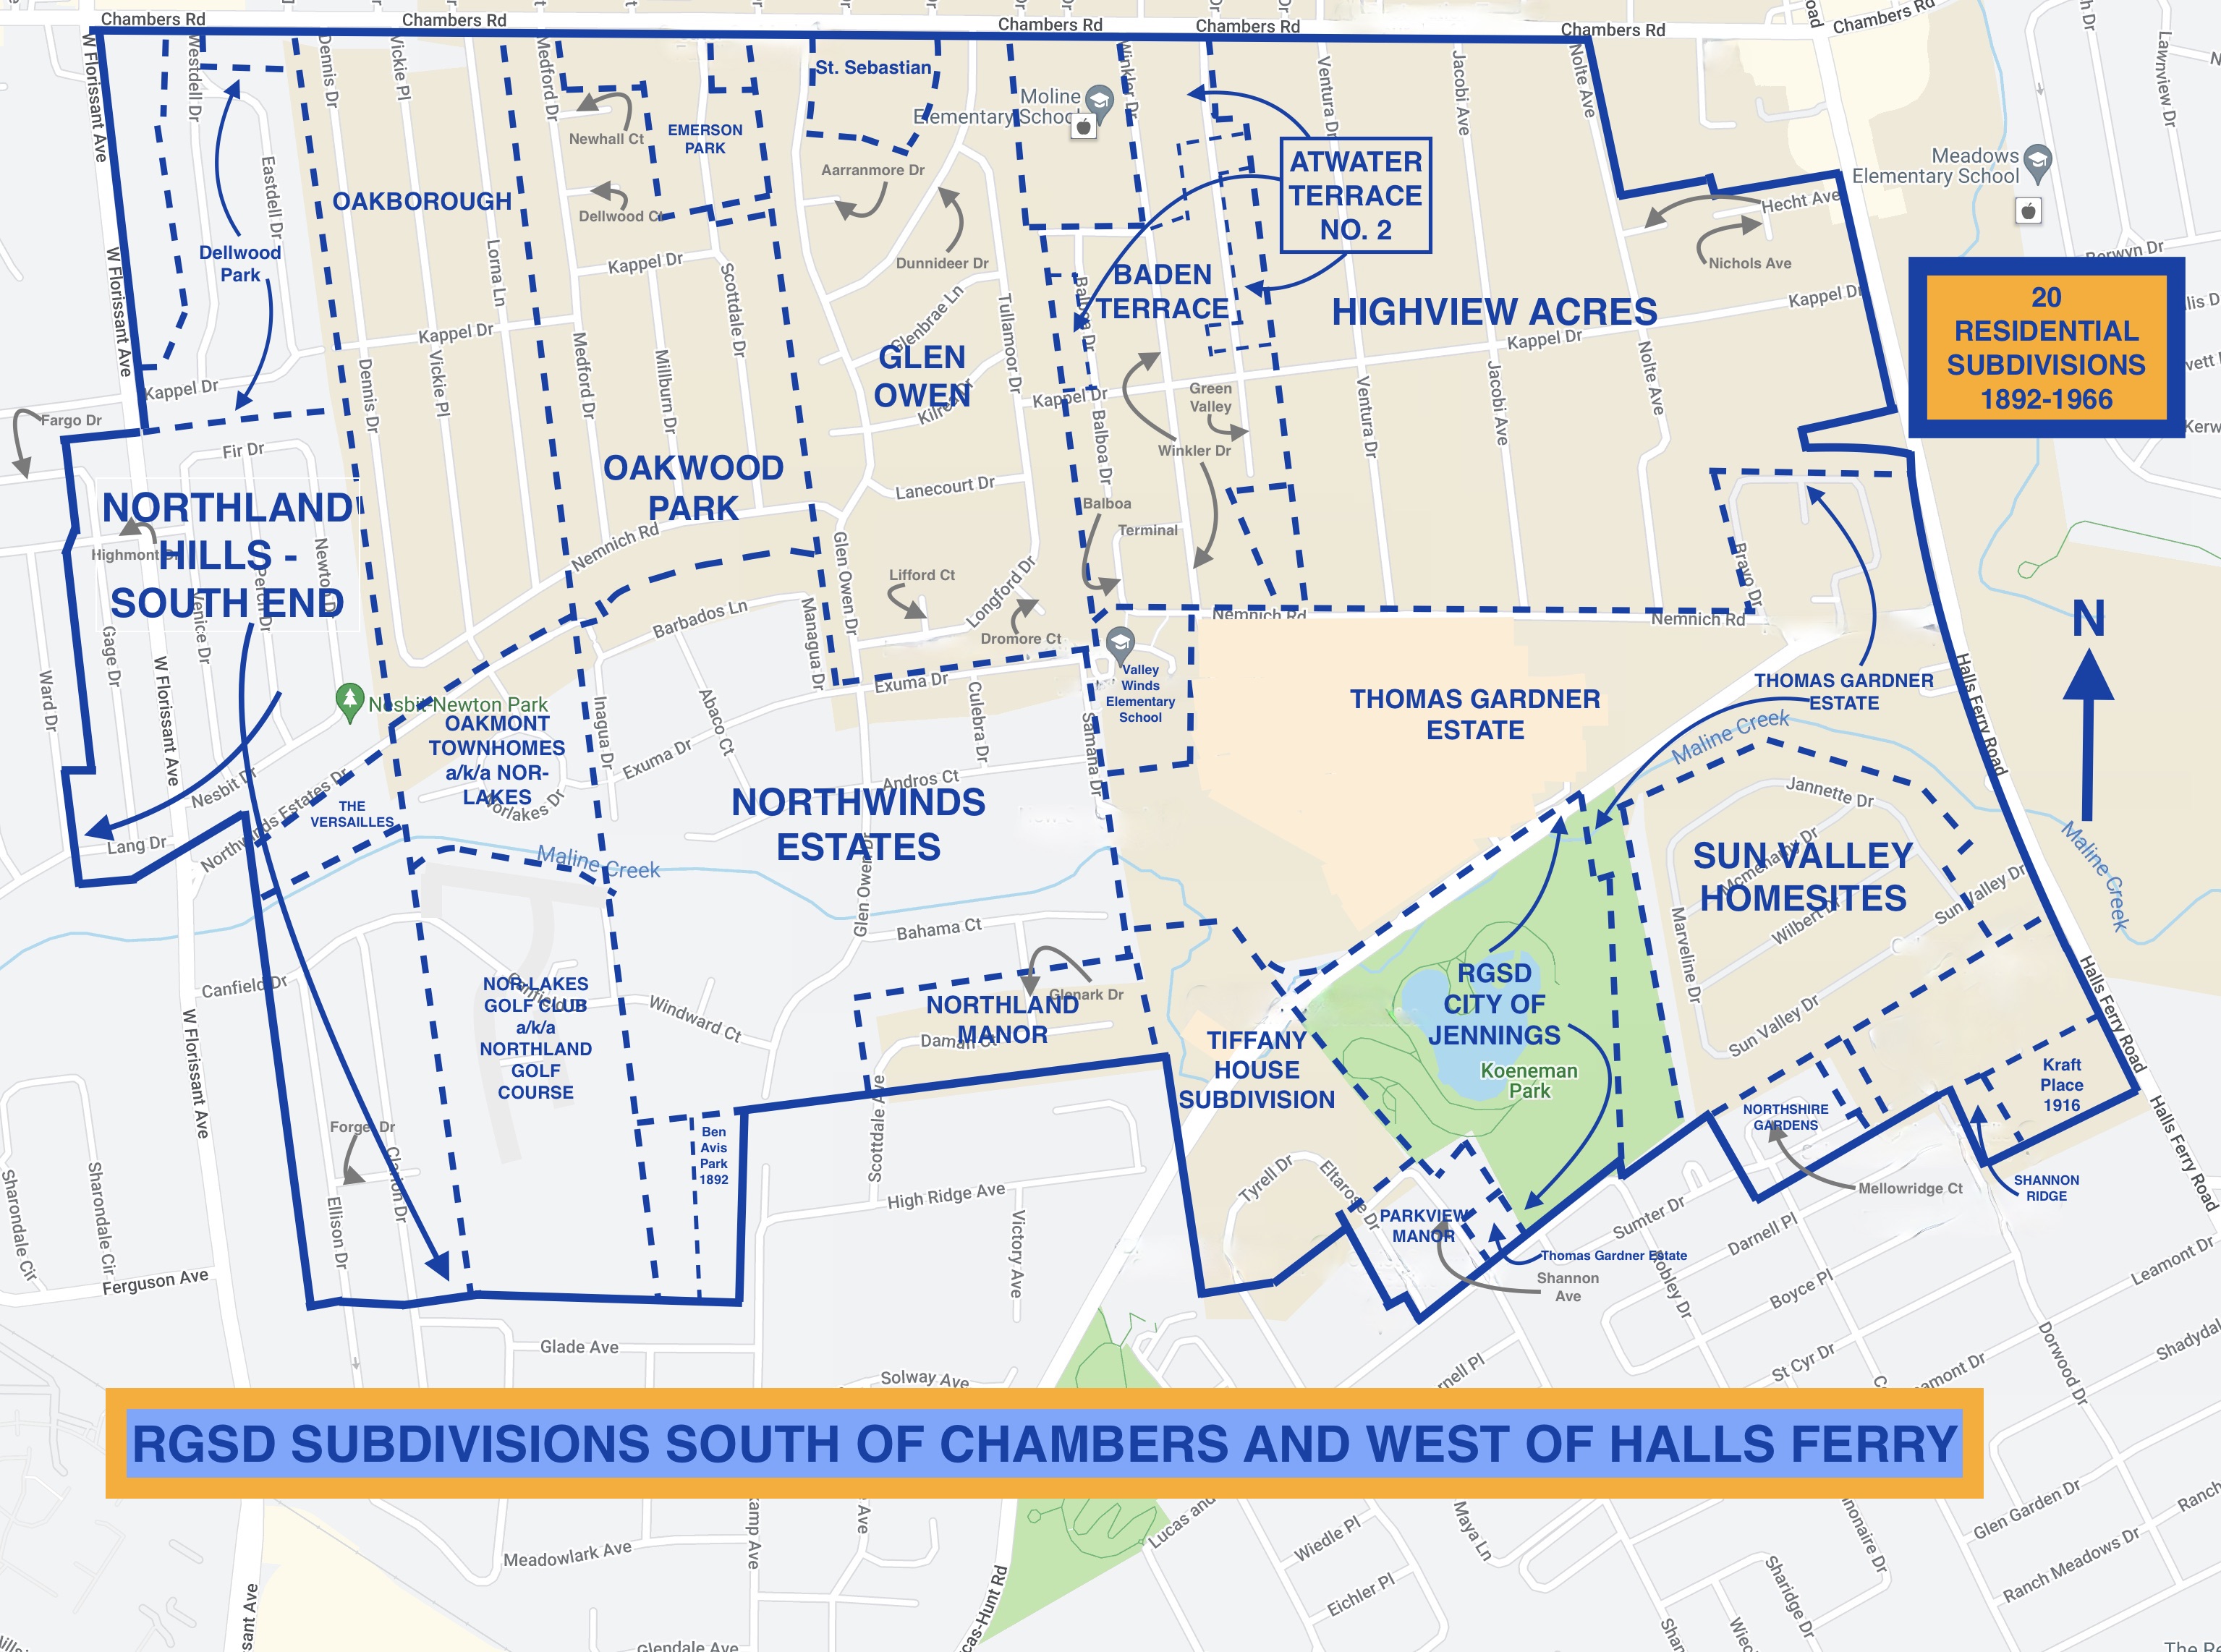 RIVERVIEW GARDENS SCHOOL DISTRICT: SUBDIVISIONS SOUTH OF CHAMBERS AND WEST OF HALLS FERRY